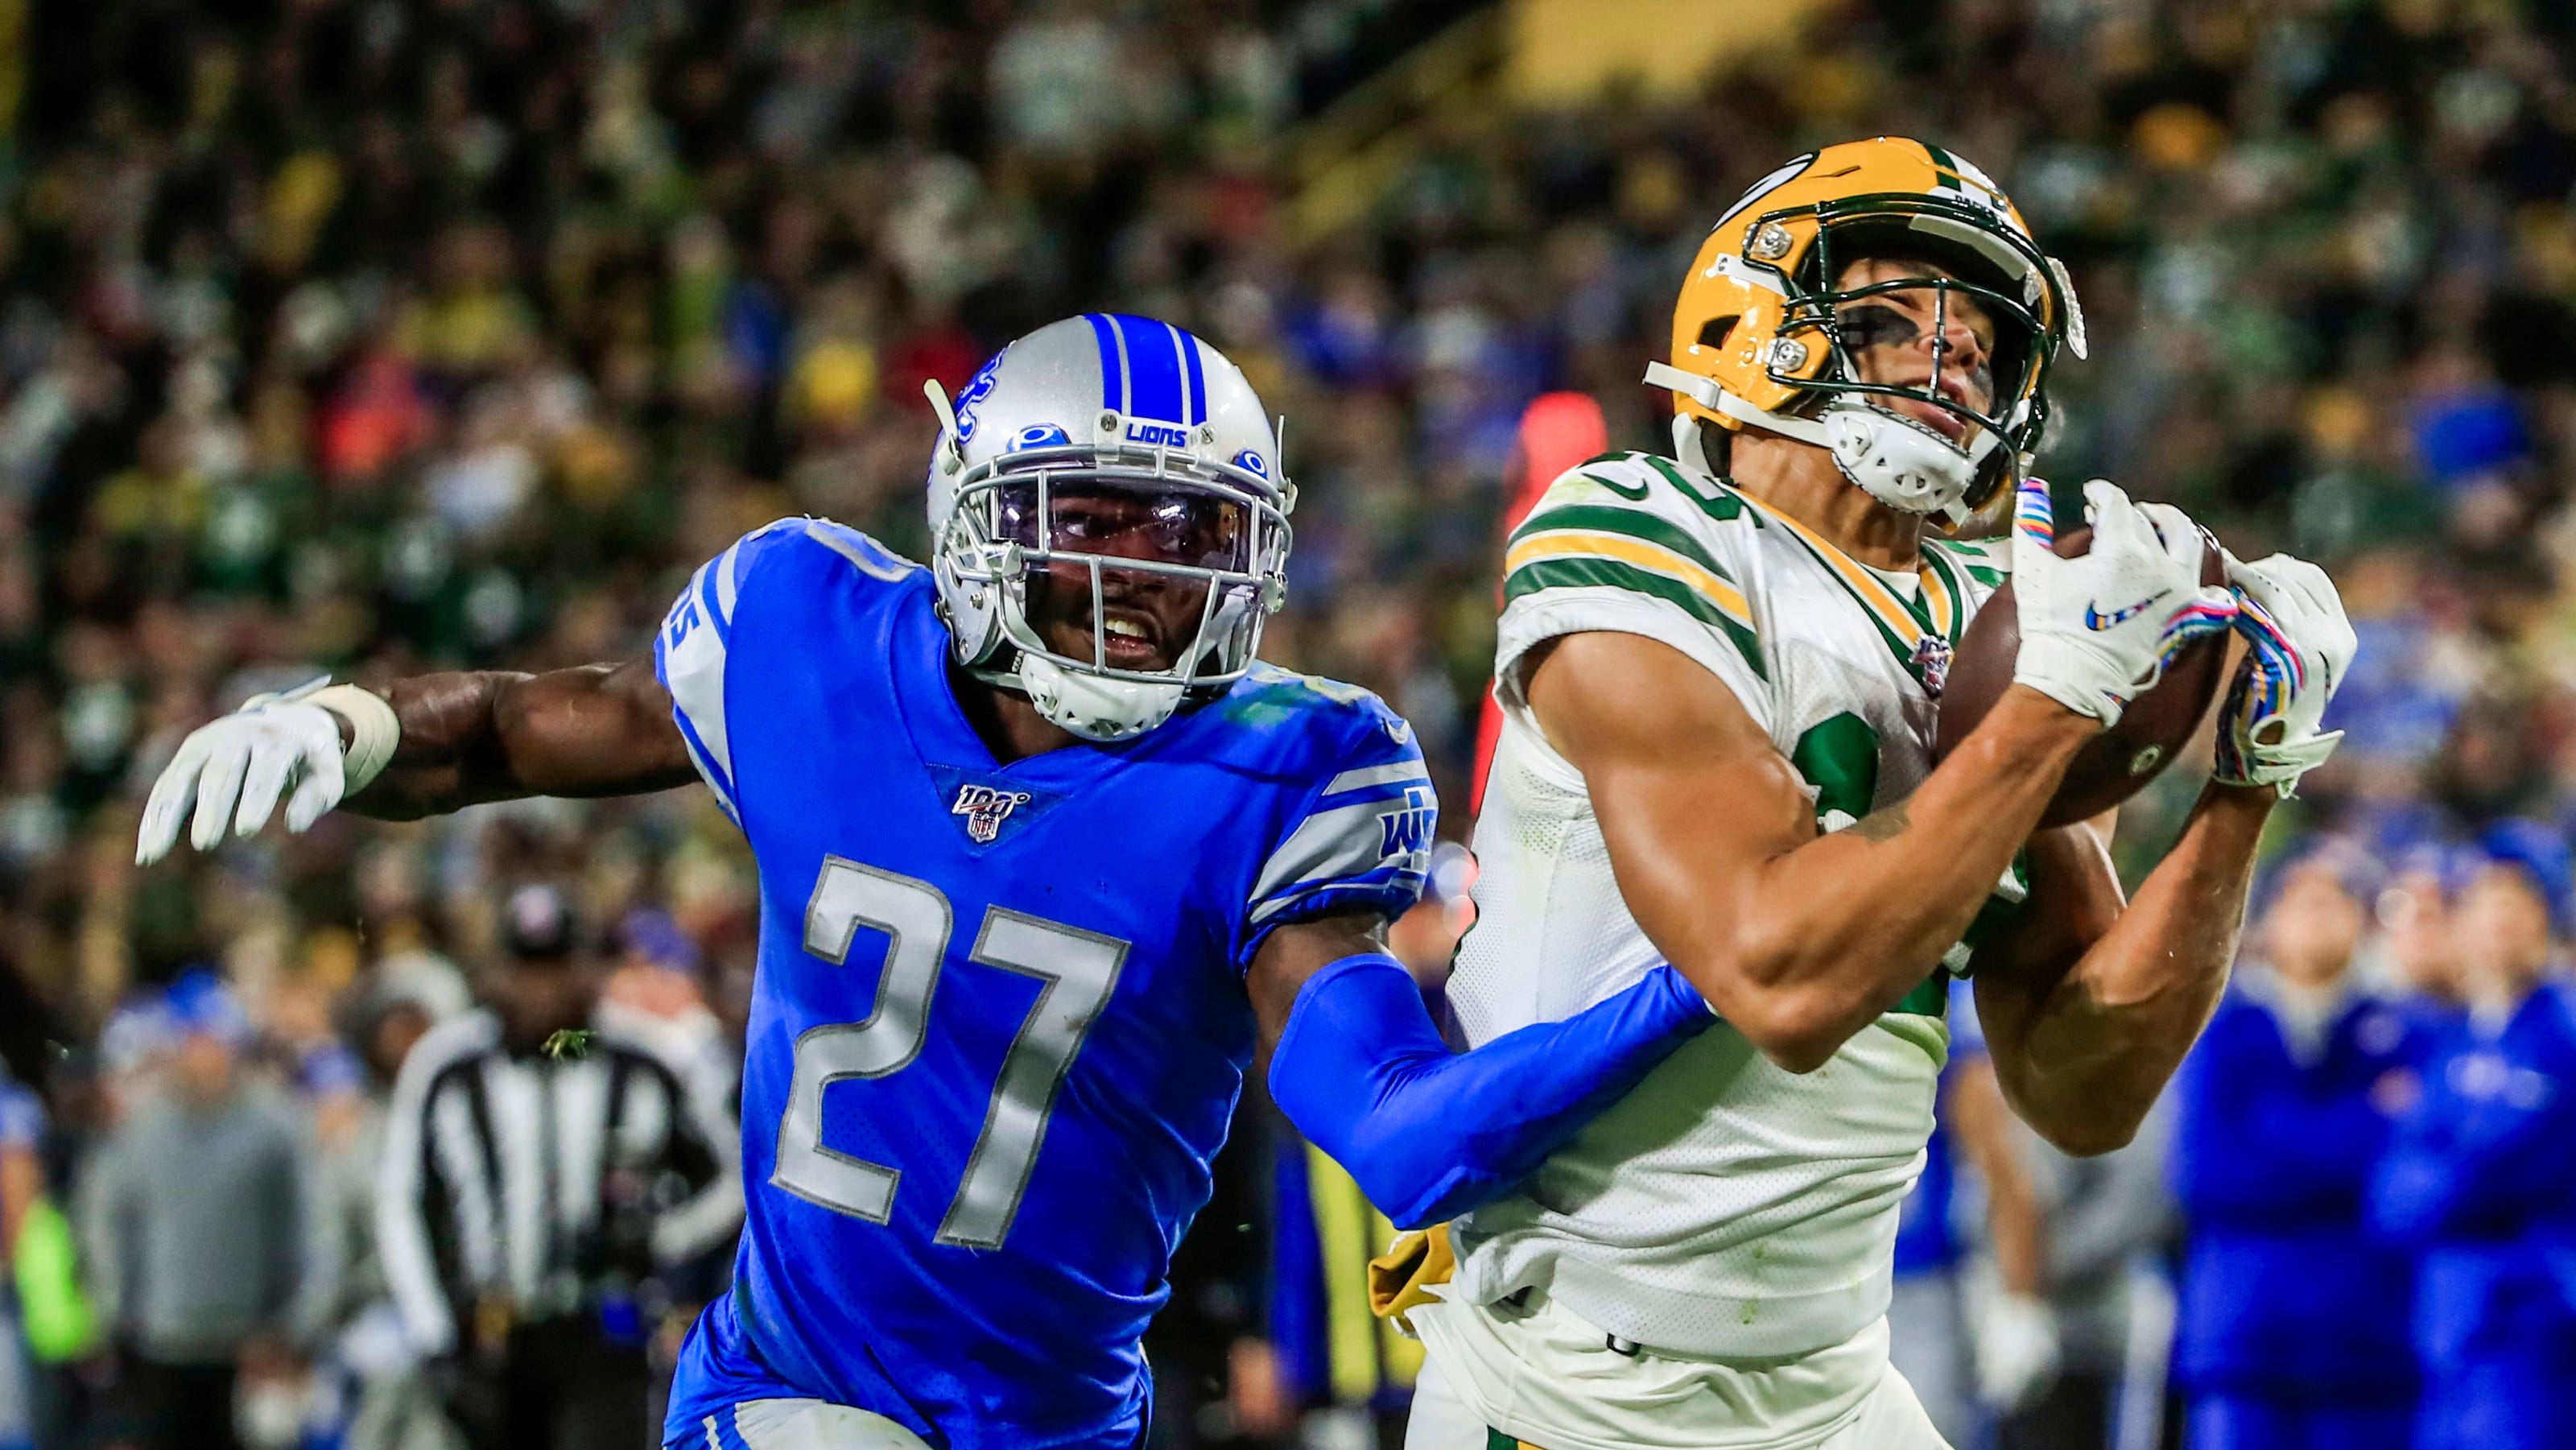 Detroit Lions vs. Green Bay Packers predictions Who wins, why?